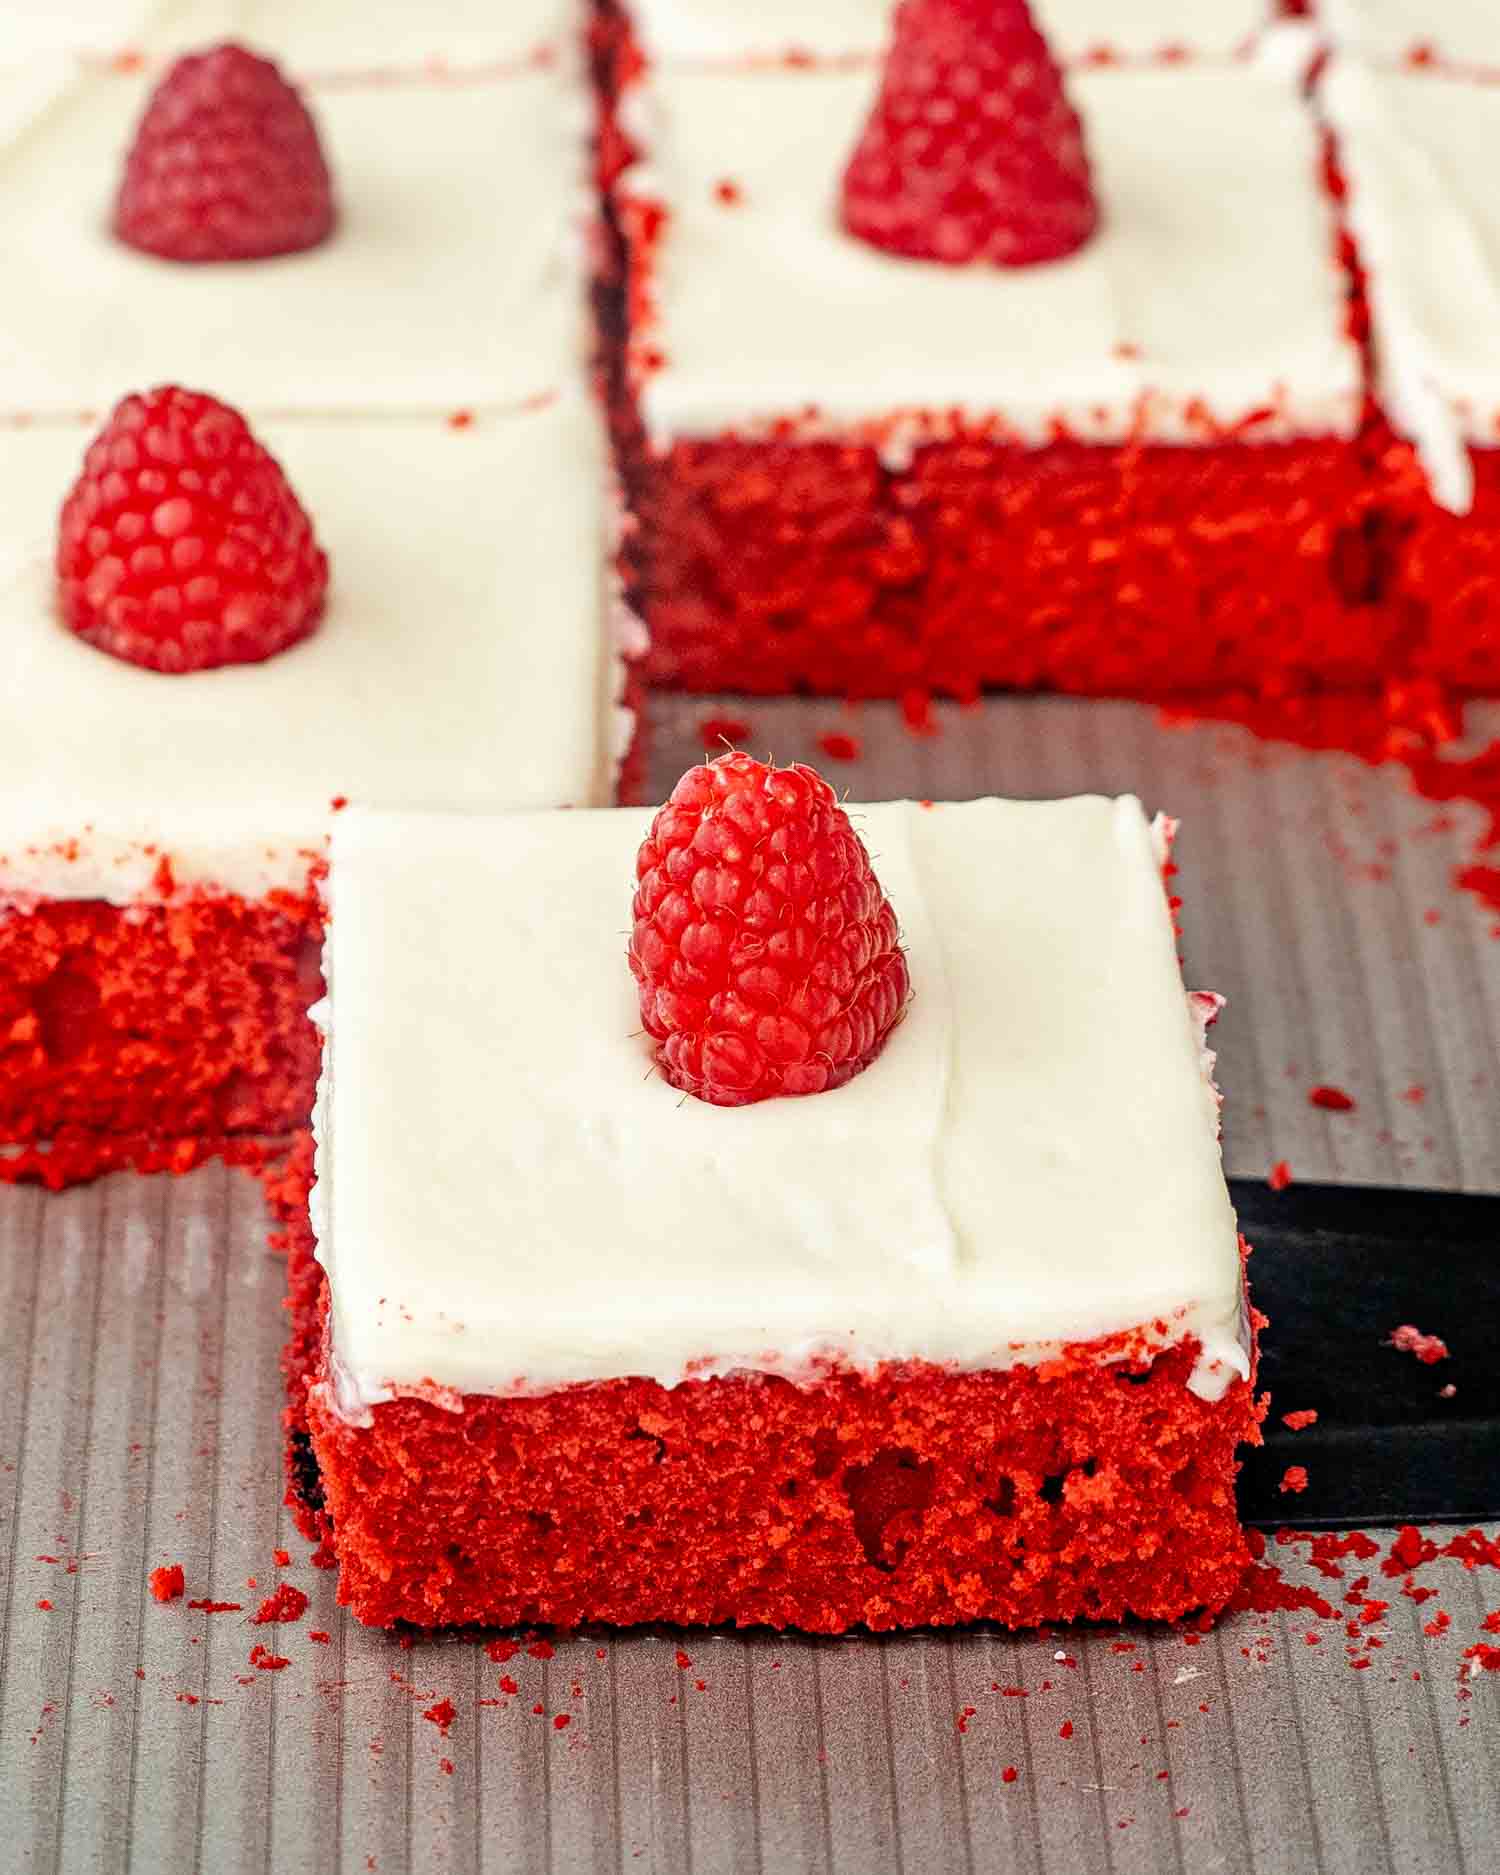 red velvet sheet cake cut into squares and topped with raspberries.